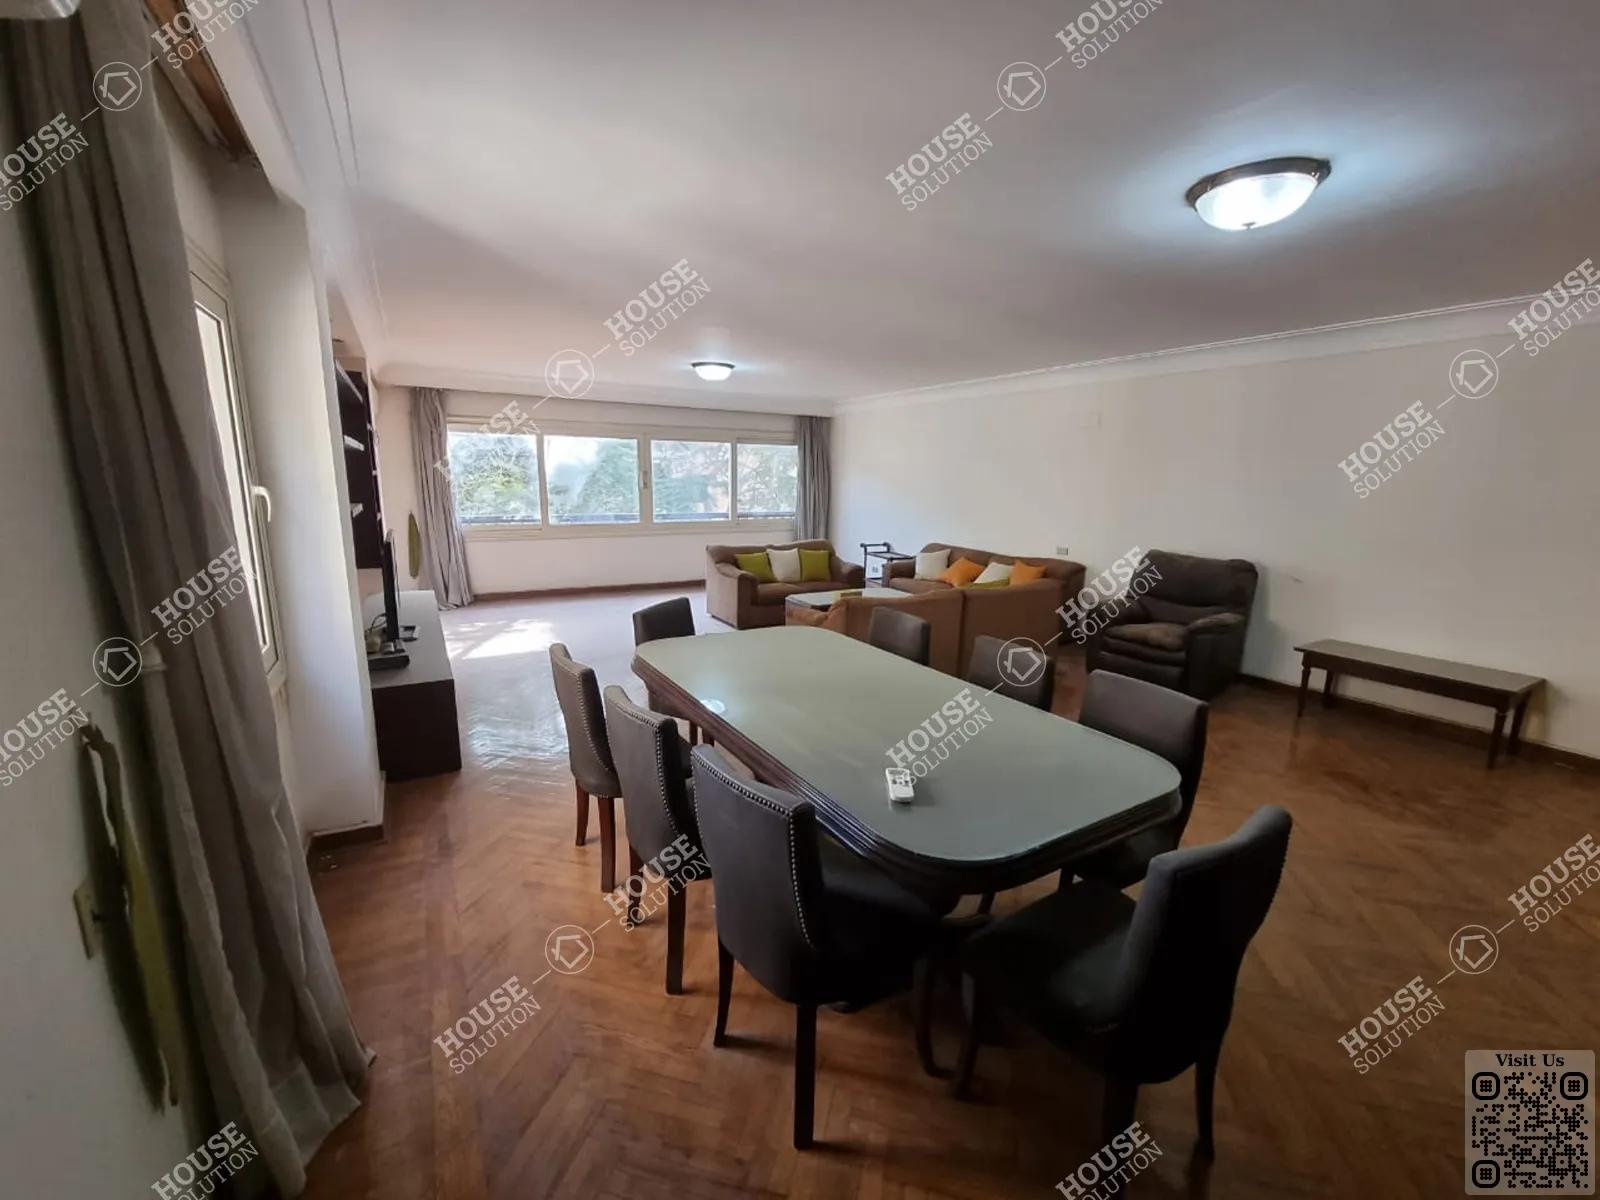 DINING AREA @ Apartments For Rent In Maadi Maadi Sarayat Area: 200 m² consists of 3 Bedrooms 2 Bathrooms Furnished 5 stars #2546-2